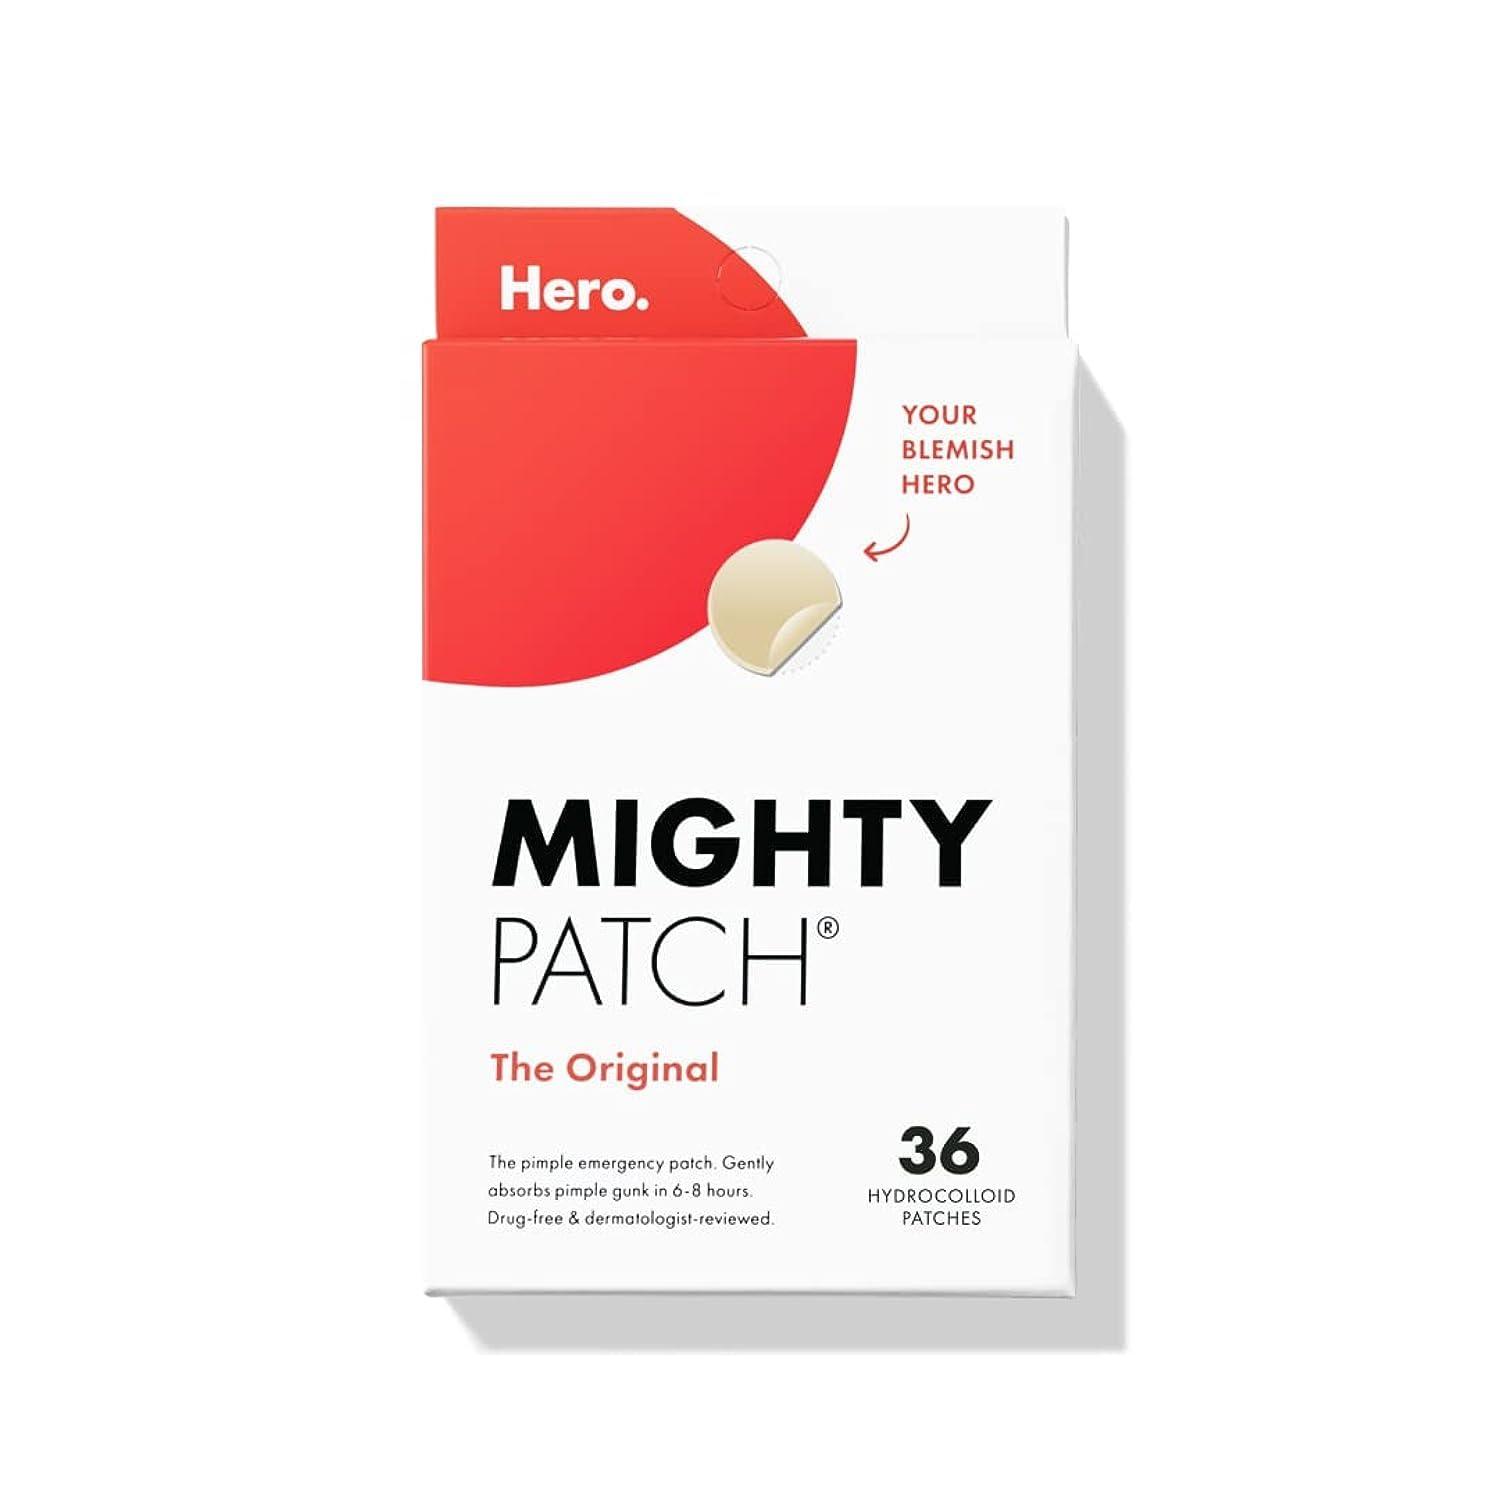 Mighty Patch™ Original Acne Pimple Patch - Overnight Zit Treatment for Clear Skin Beauty Visit the Mighty Patch Store   